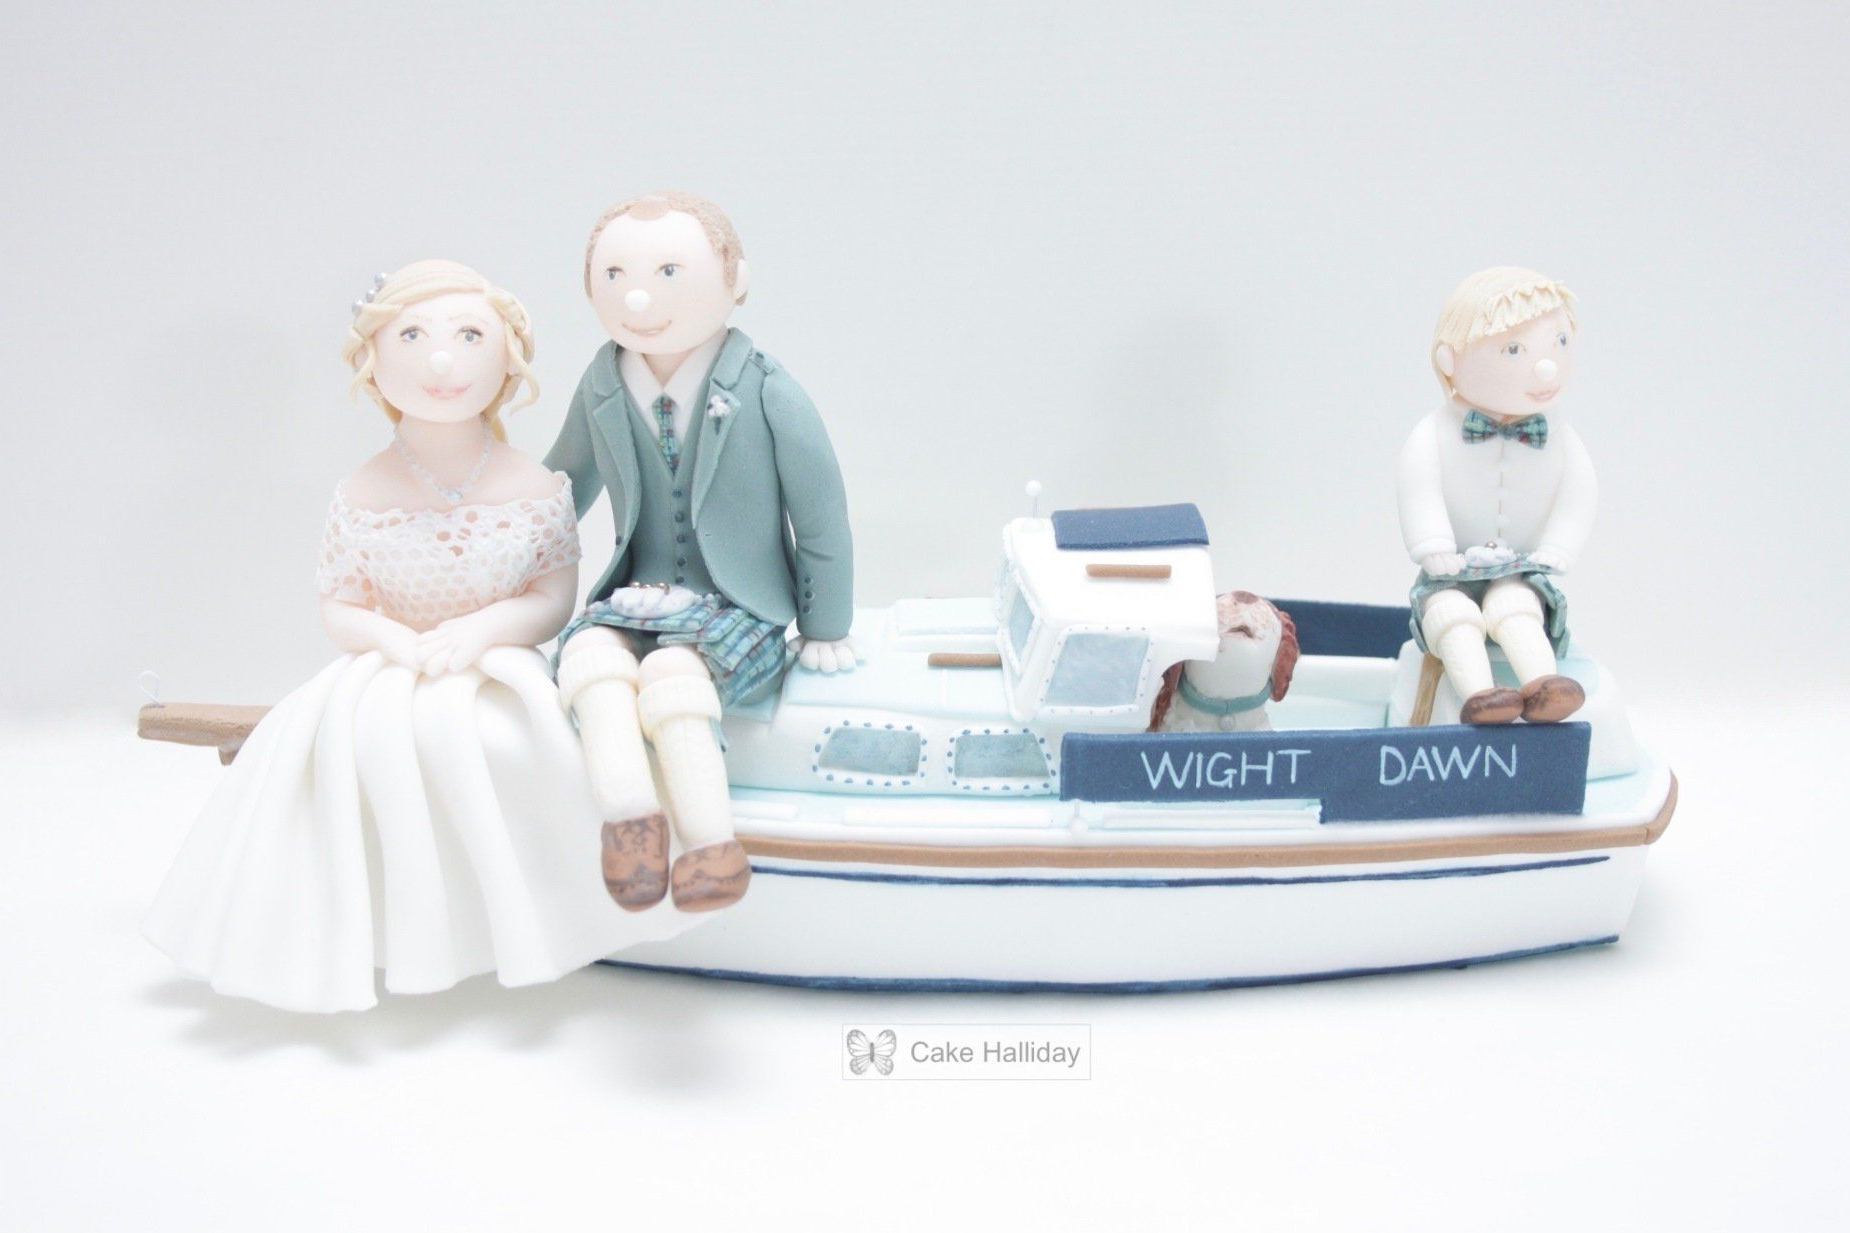 Wedding cake boat topper with sugar figures of bride, groom (in kilt), page boy & family pet. Ayrshire, Glasgow, Scotland.